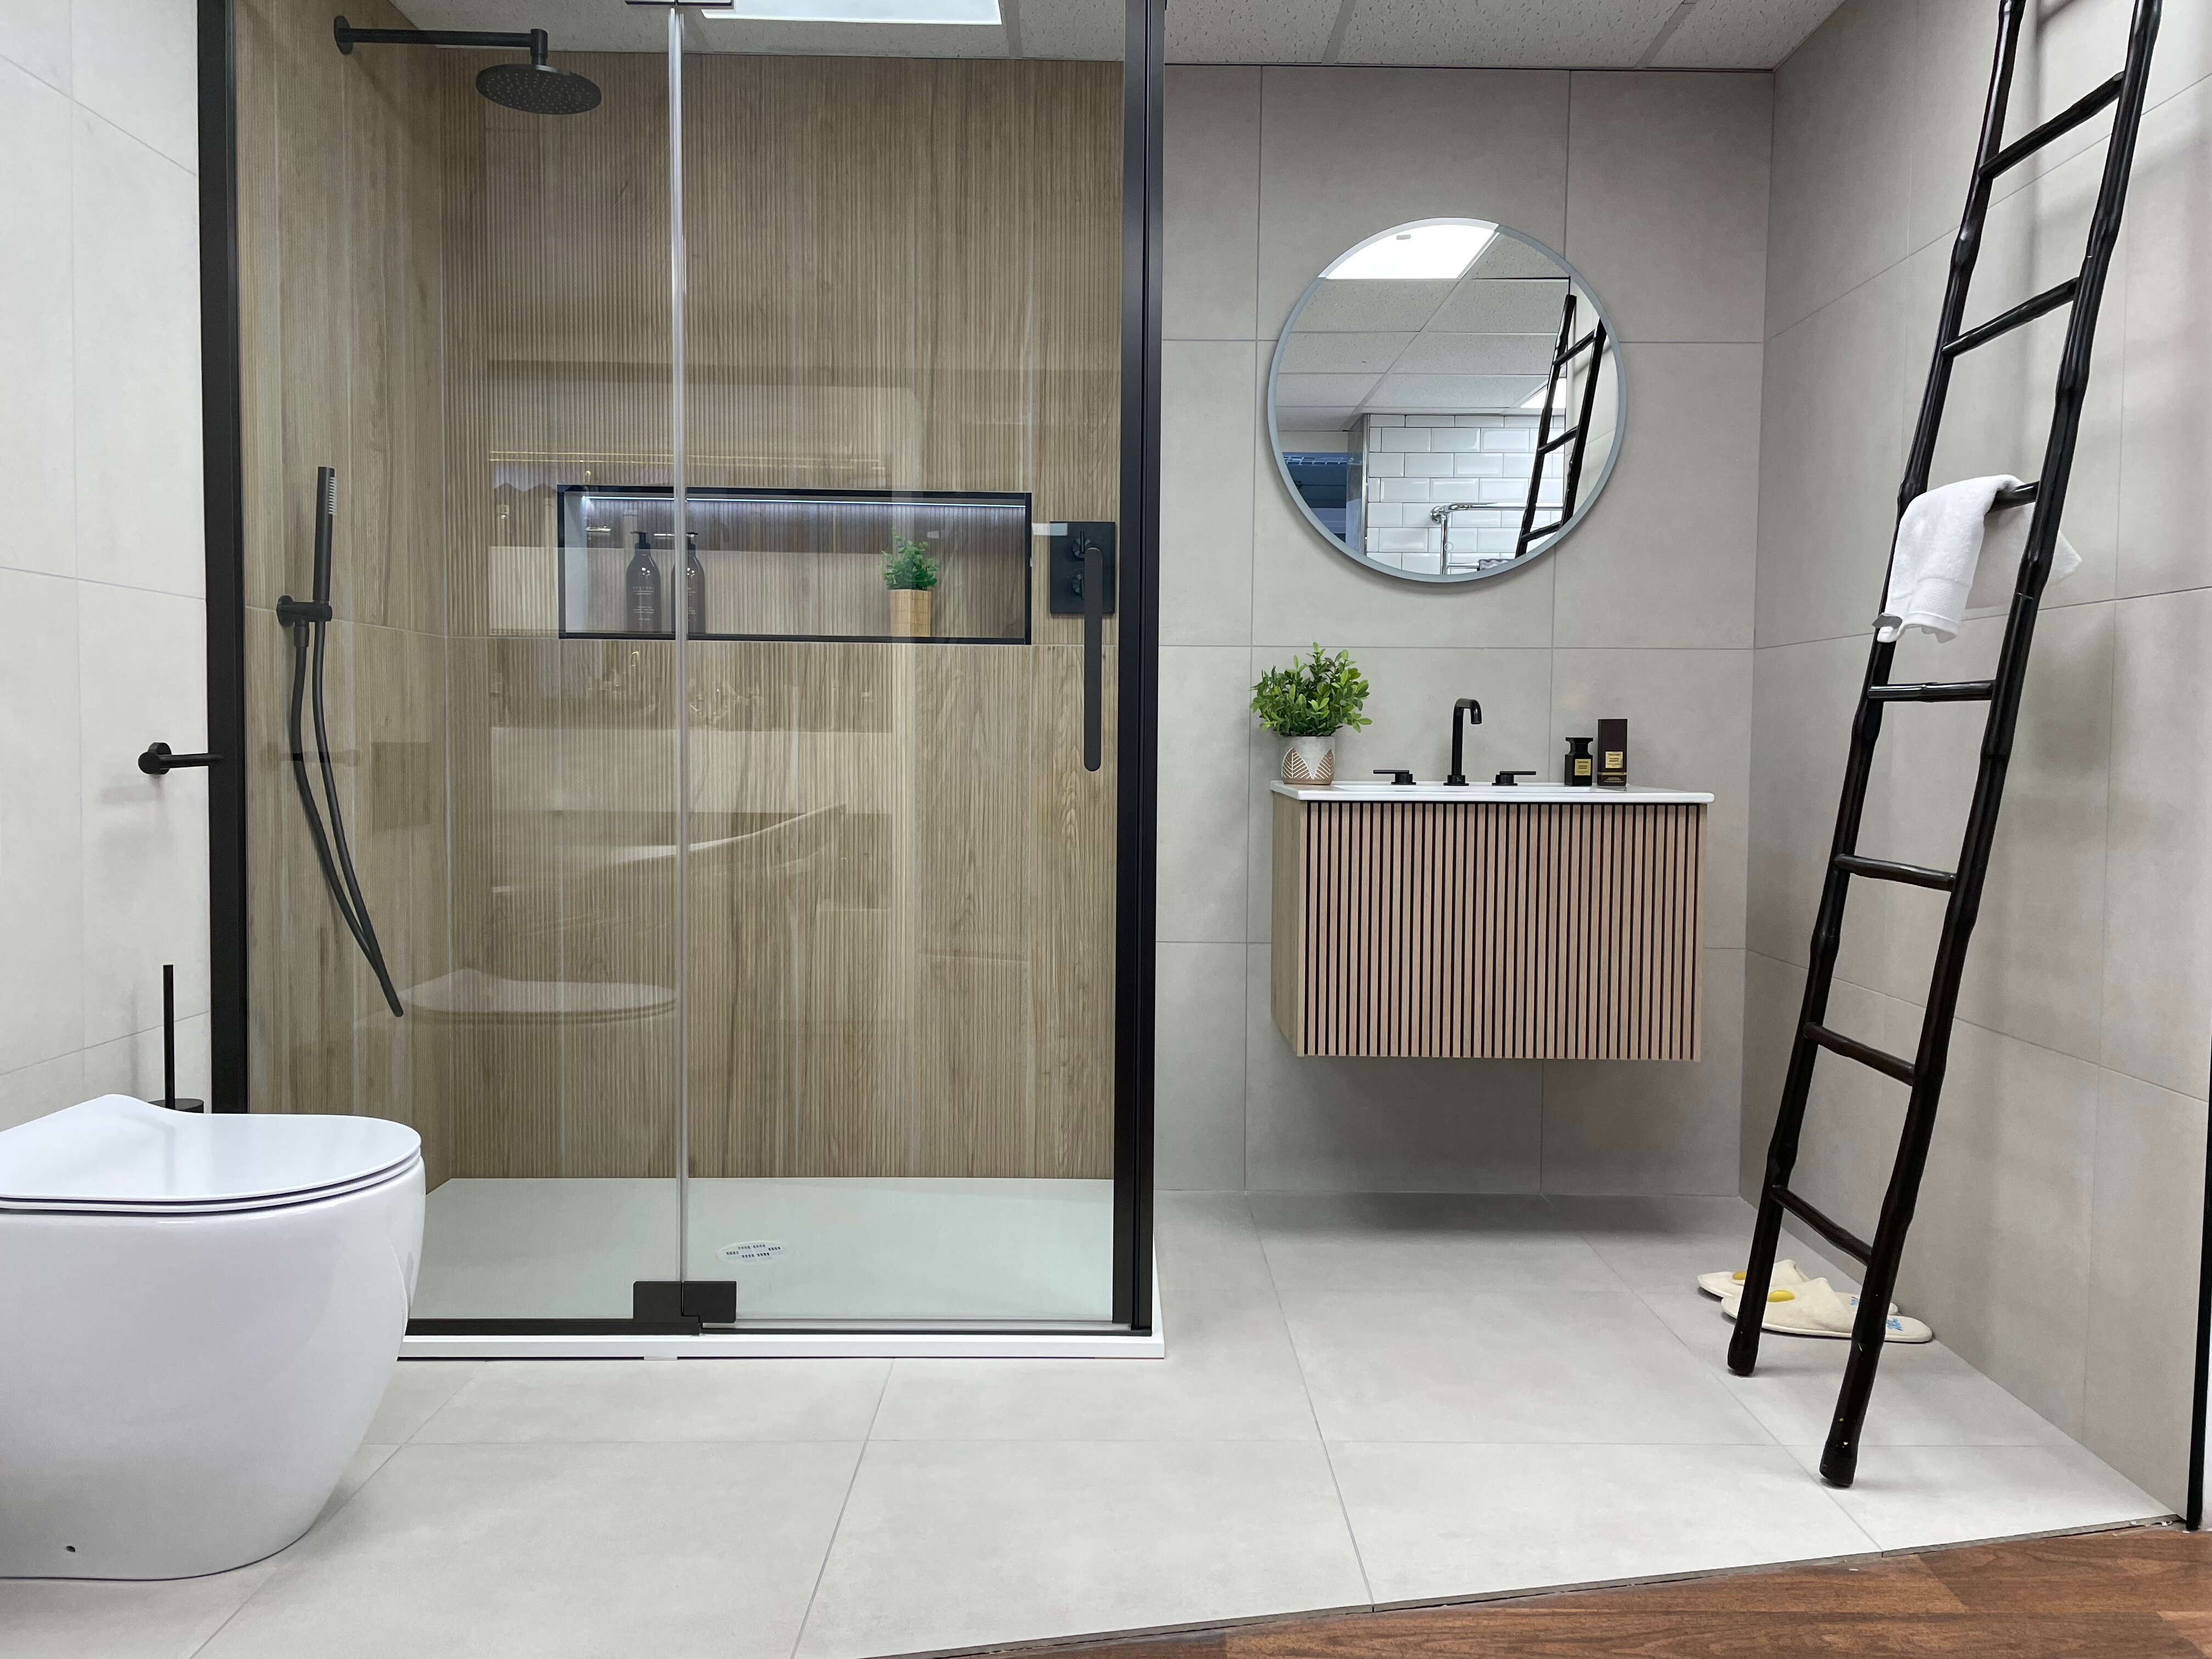 image of shower enclosure with wooden wall panels and matching wooden fluted vanity unit